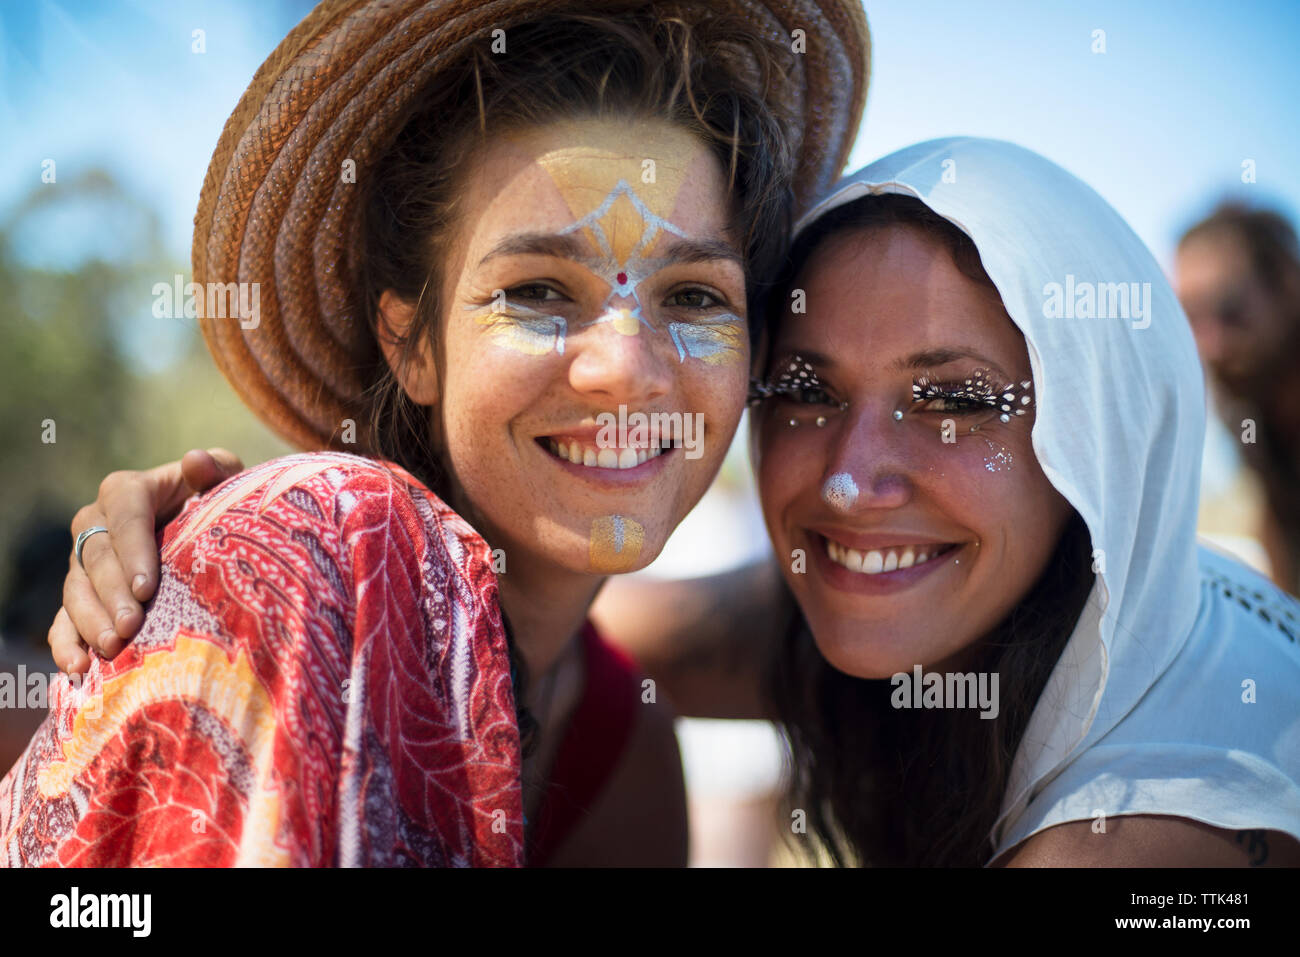 Portrait of smiling friends with face paint at traditional event Stock Photo